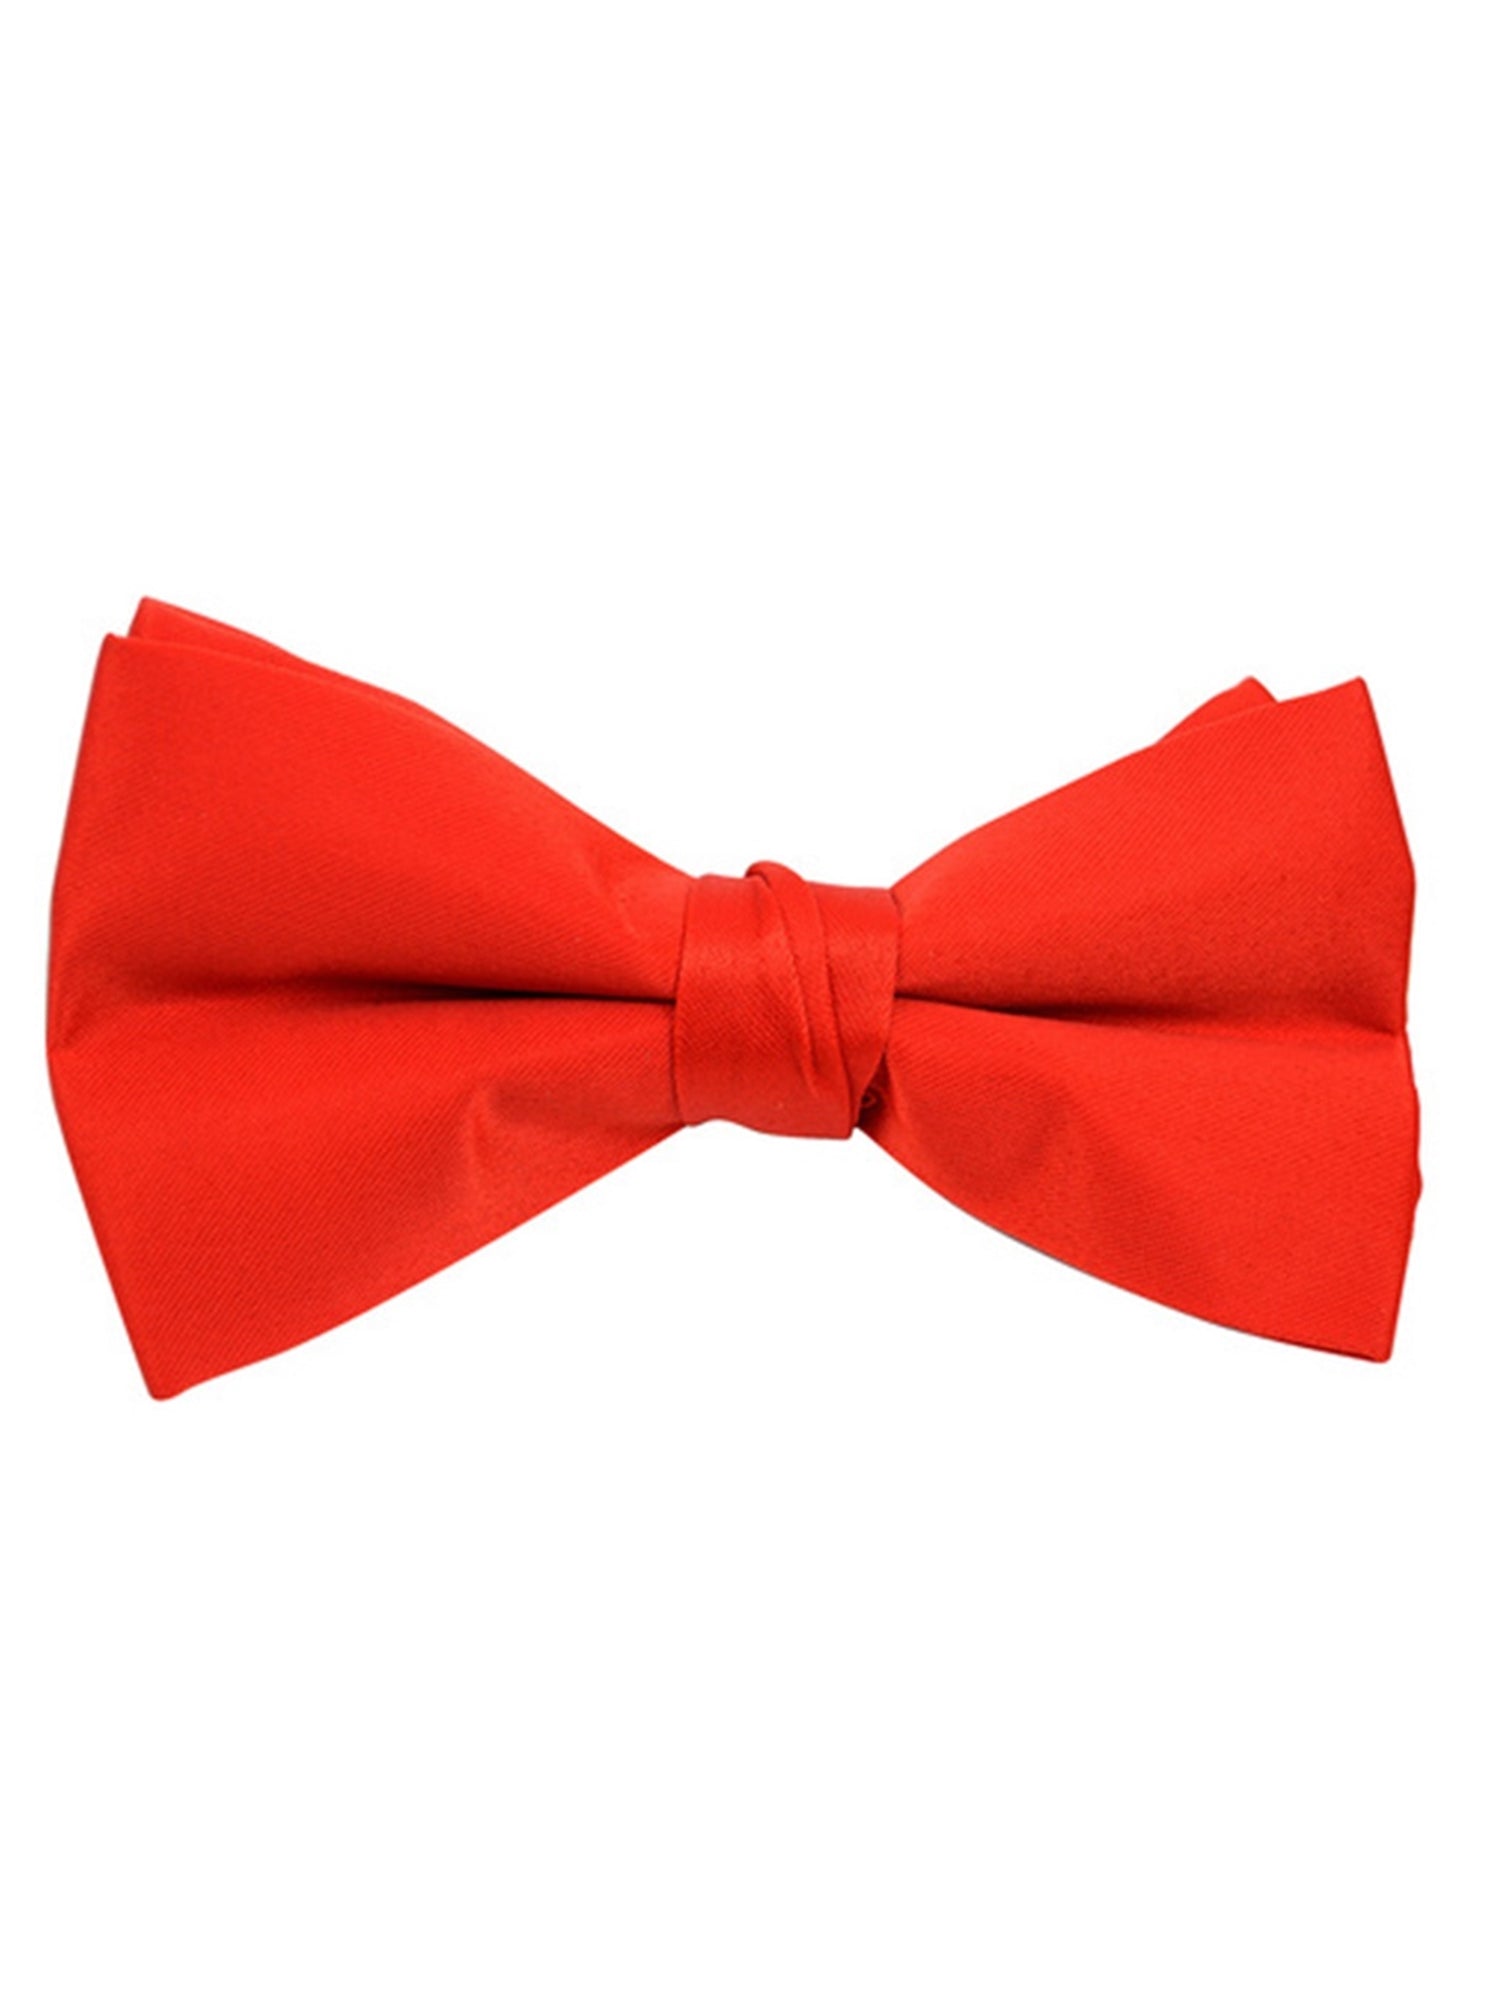 Young Boy's Pre-tied Clip On Bow Tie - Formal Tuxedo Solid Color Boy's Solid Color Bow Tie TheDapperTie Red One Size 